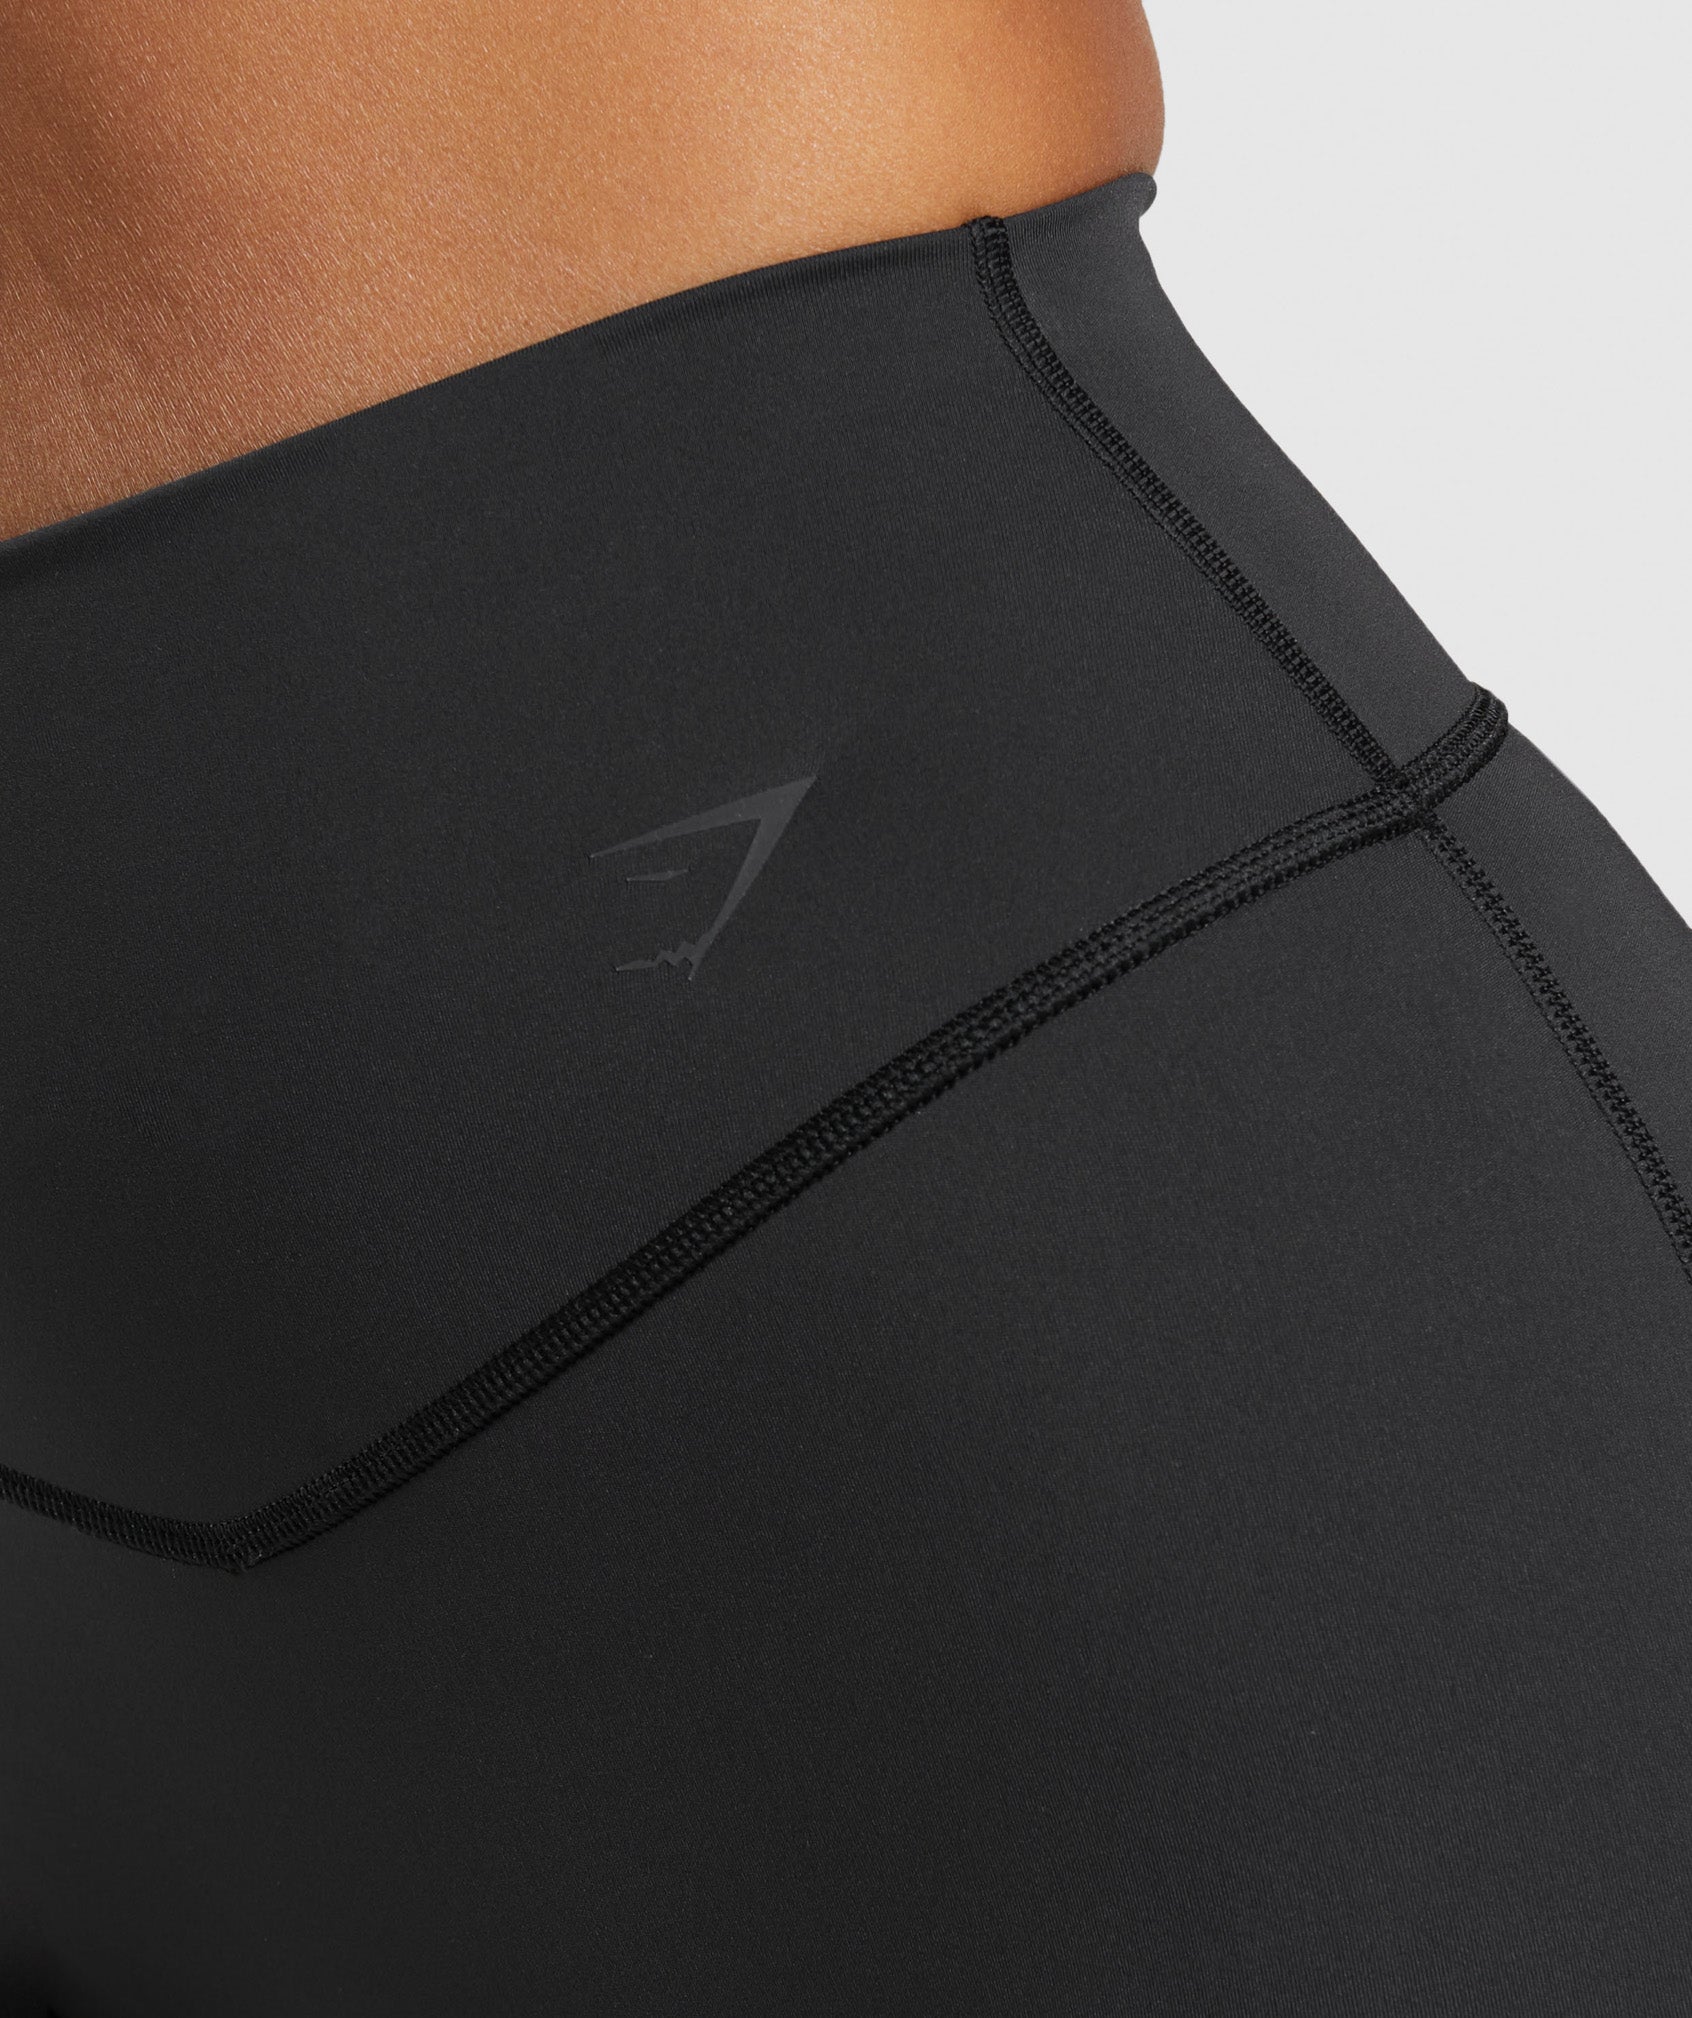 Elevate Shorts in Black - view 5